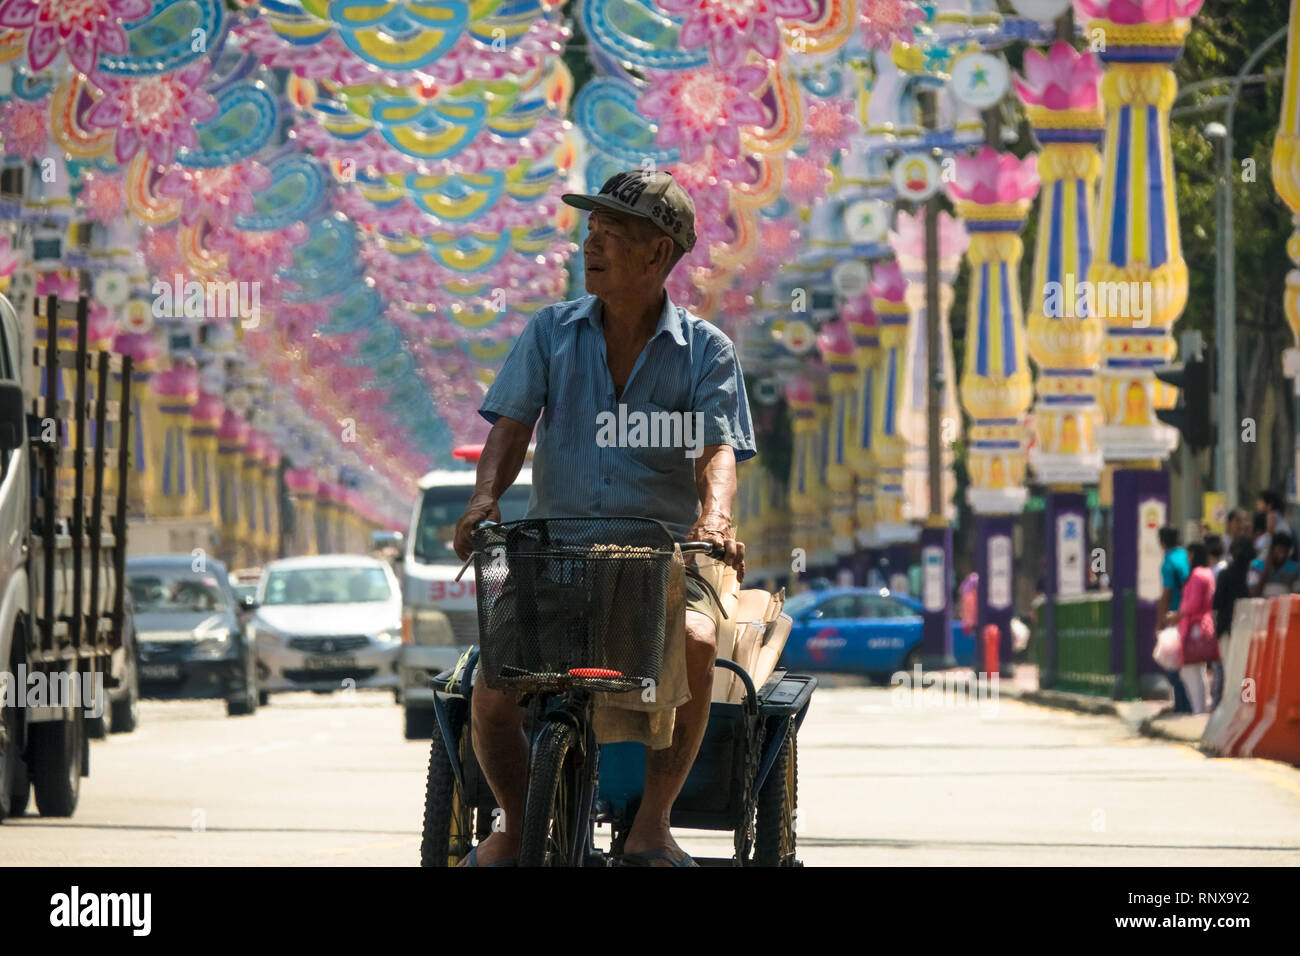 Man riding bicycle with basket in Singapore traffic - Deepavali Festival in Little India Stock Photo